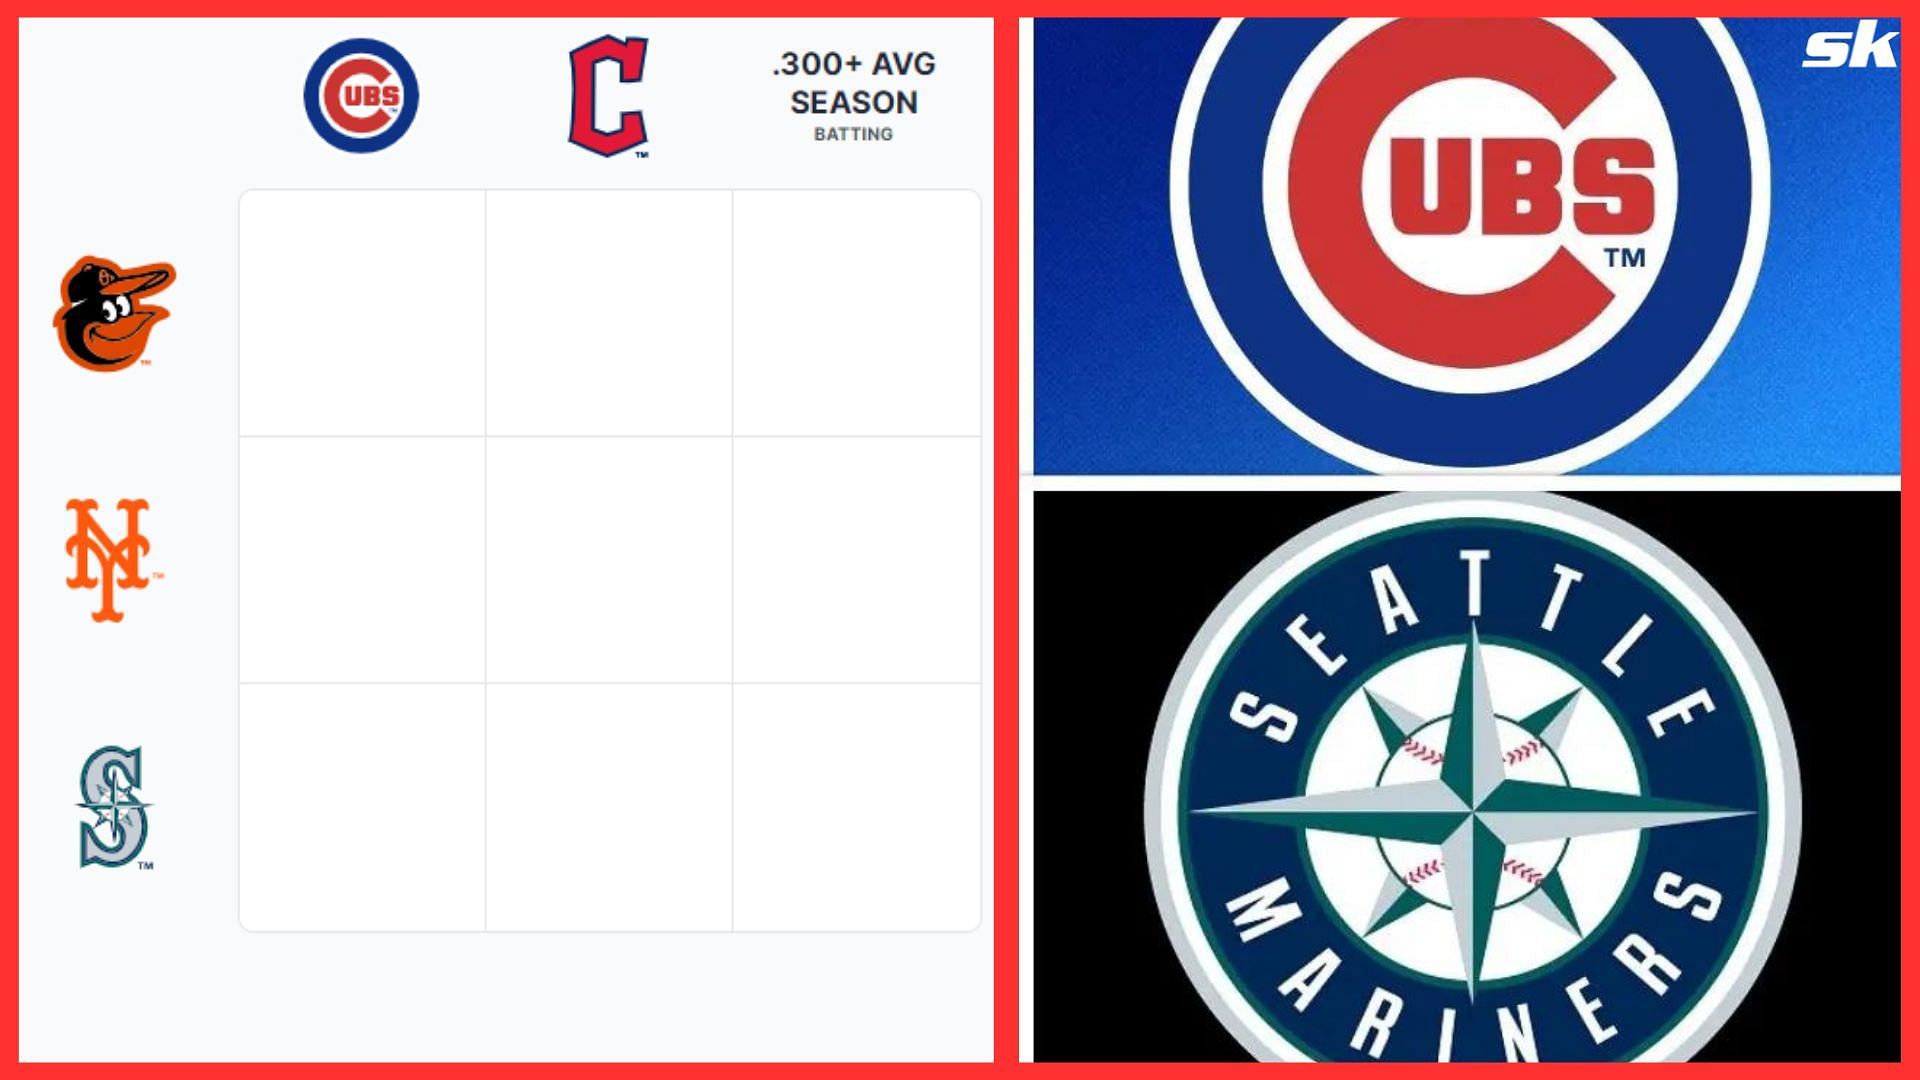 Which players have played for both Cubs and Mariners in their careers